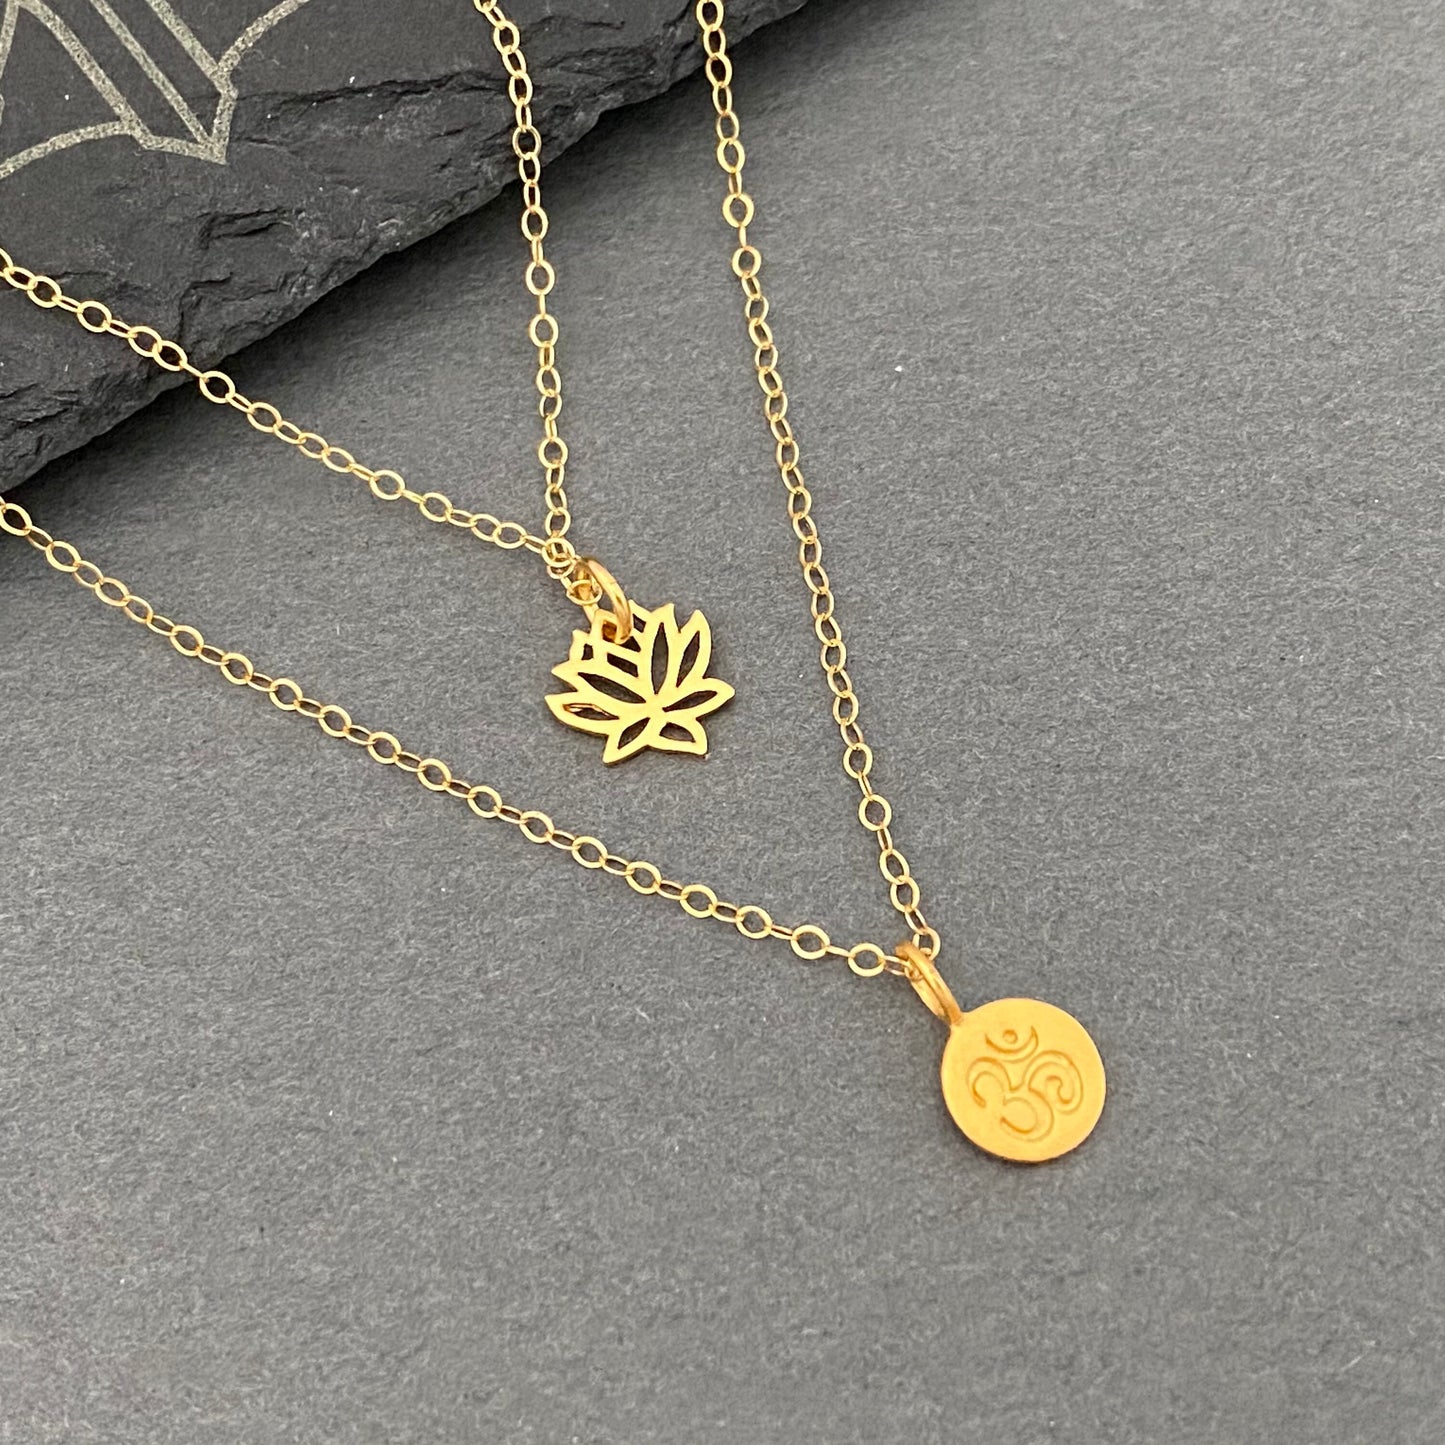 Om and Lotus flower layered necklaces